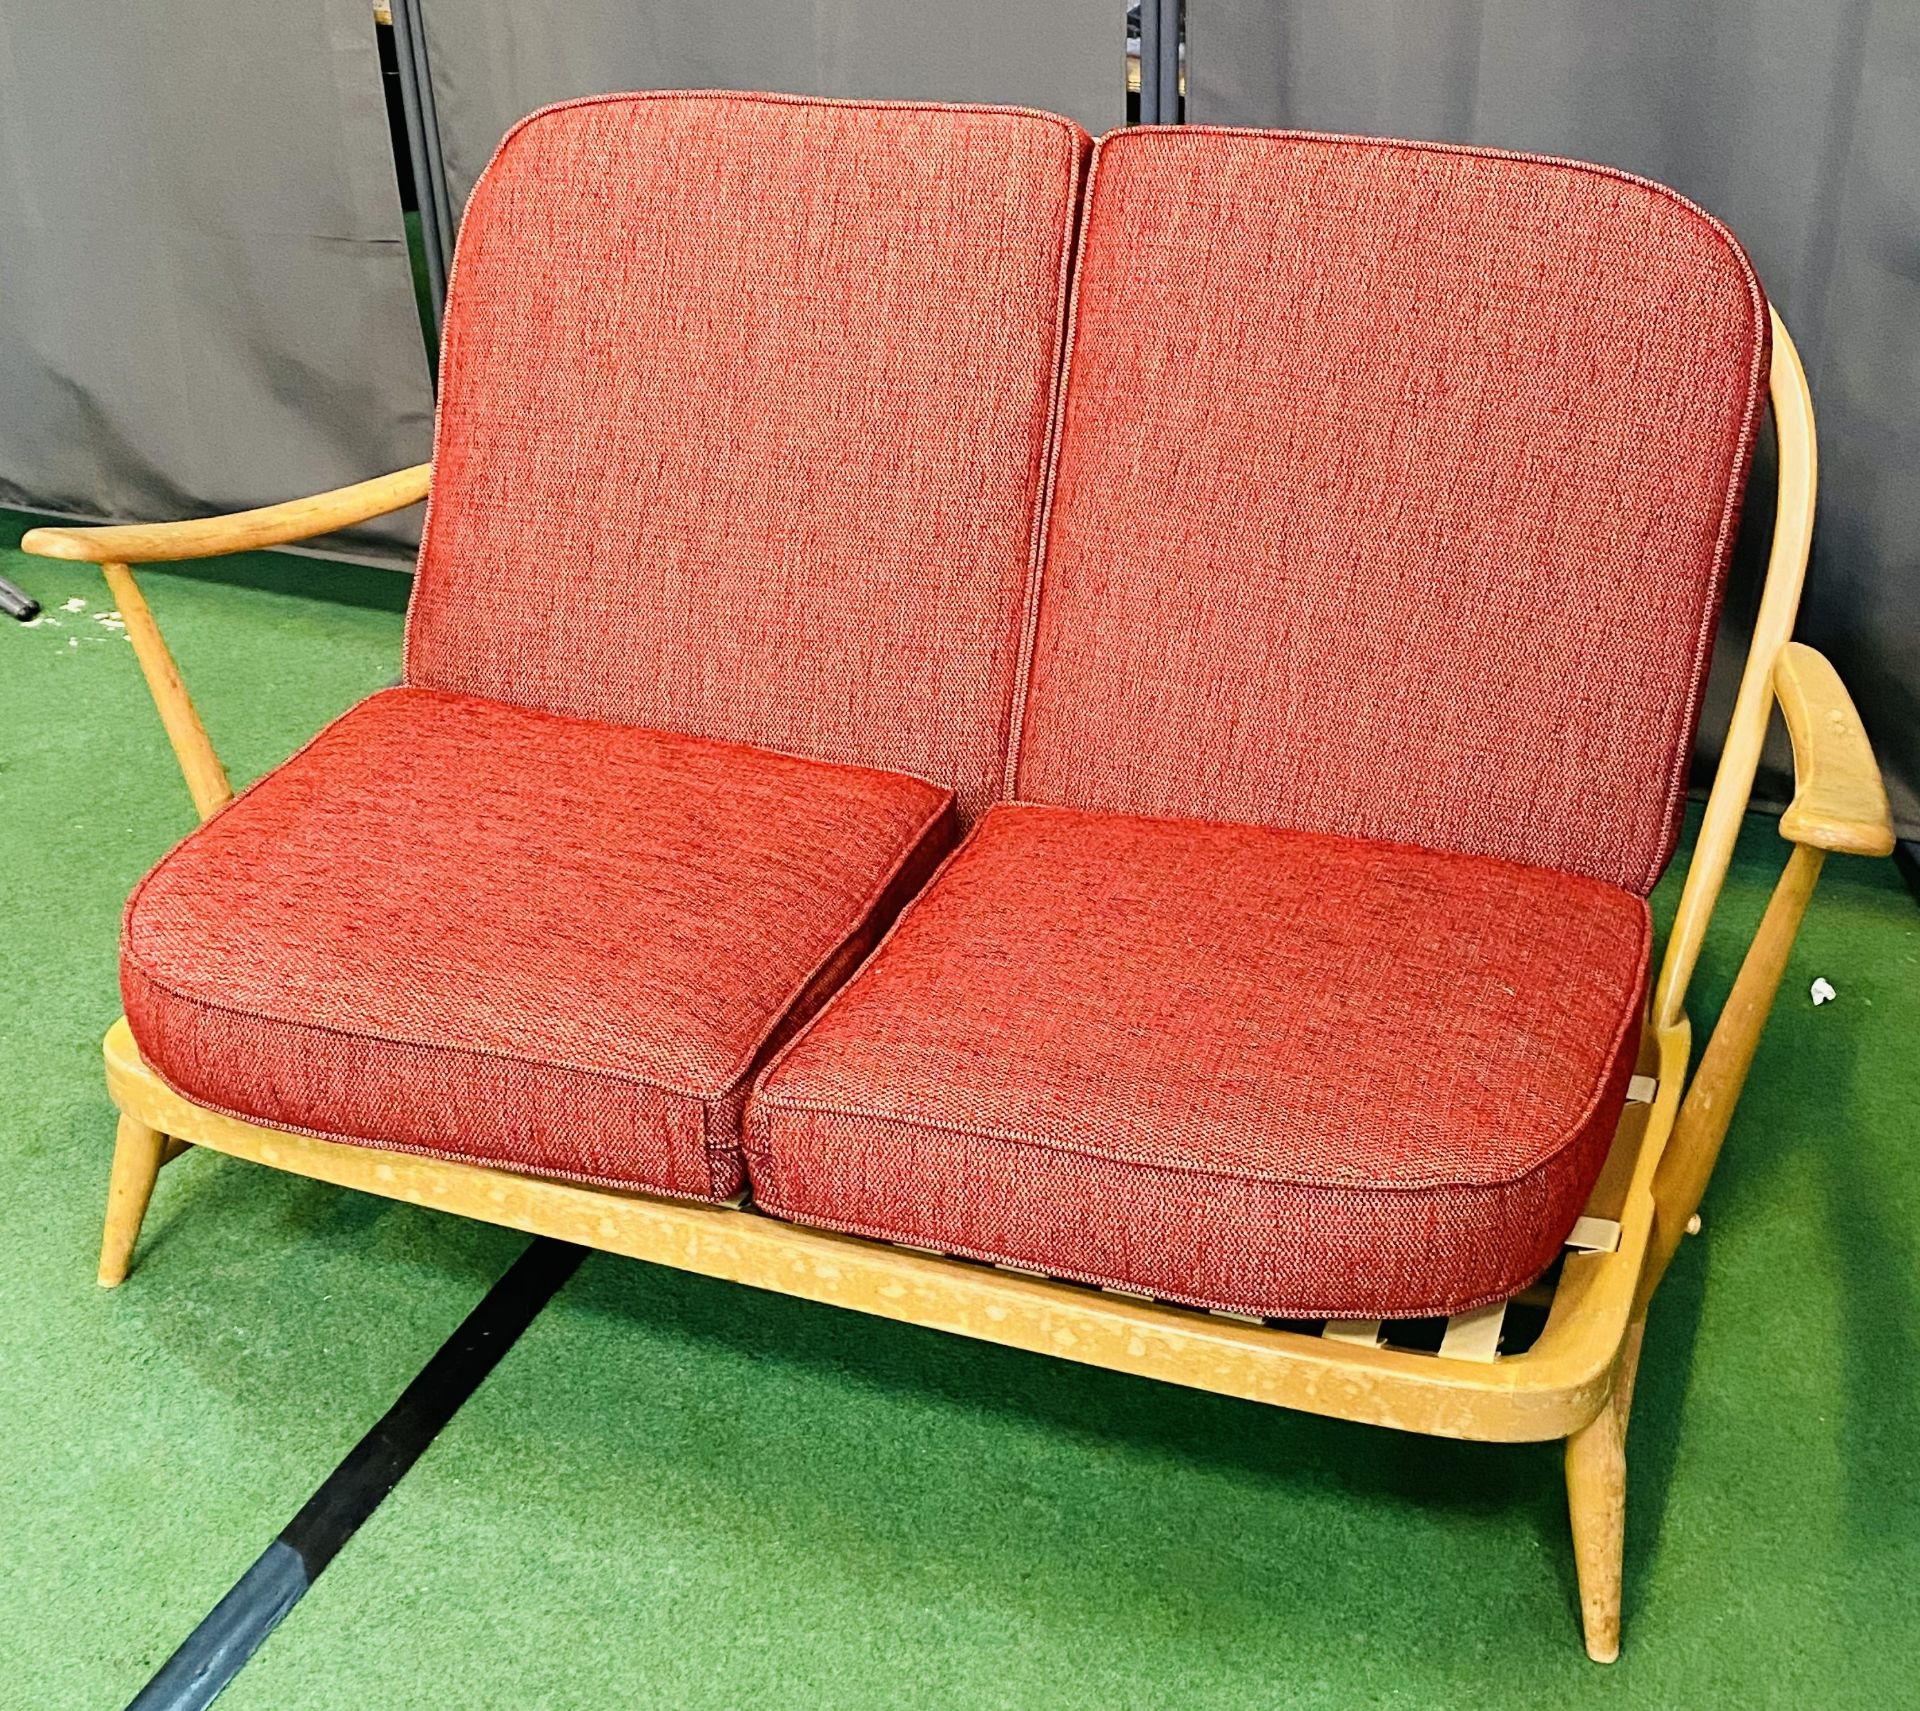 Ercol style spindle back sofa - Image 4 of 4